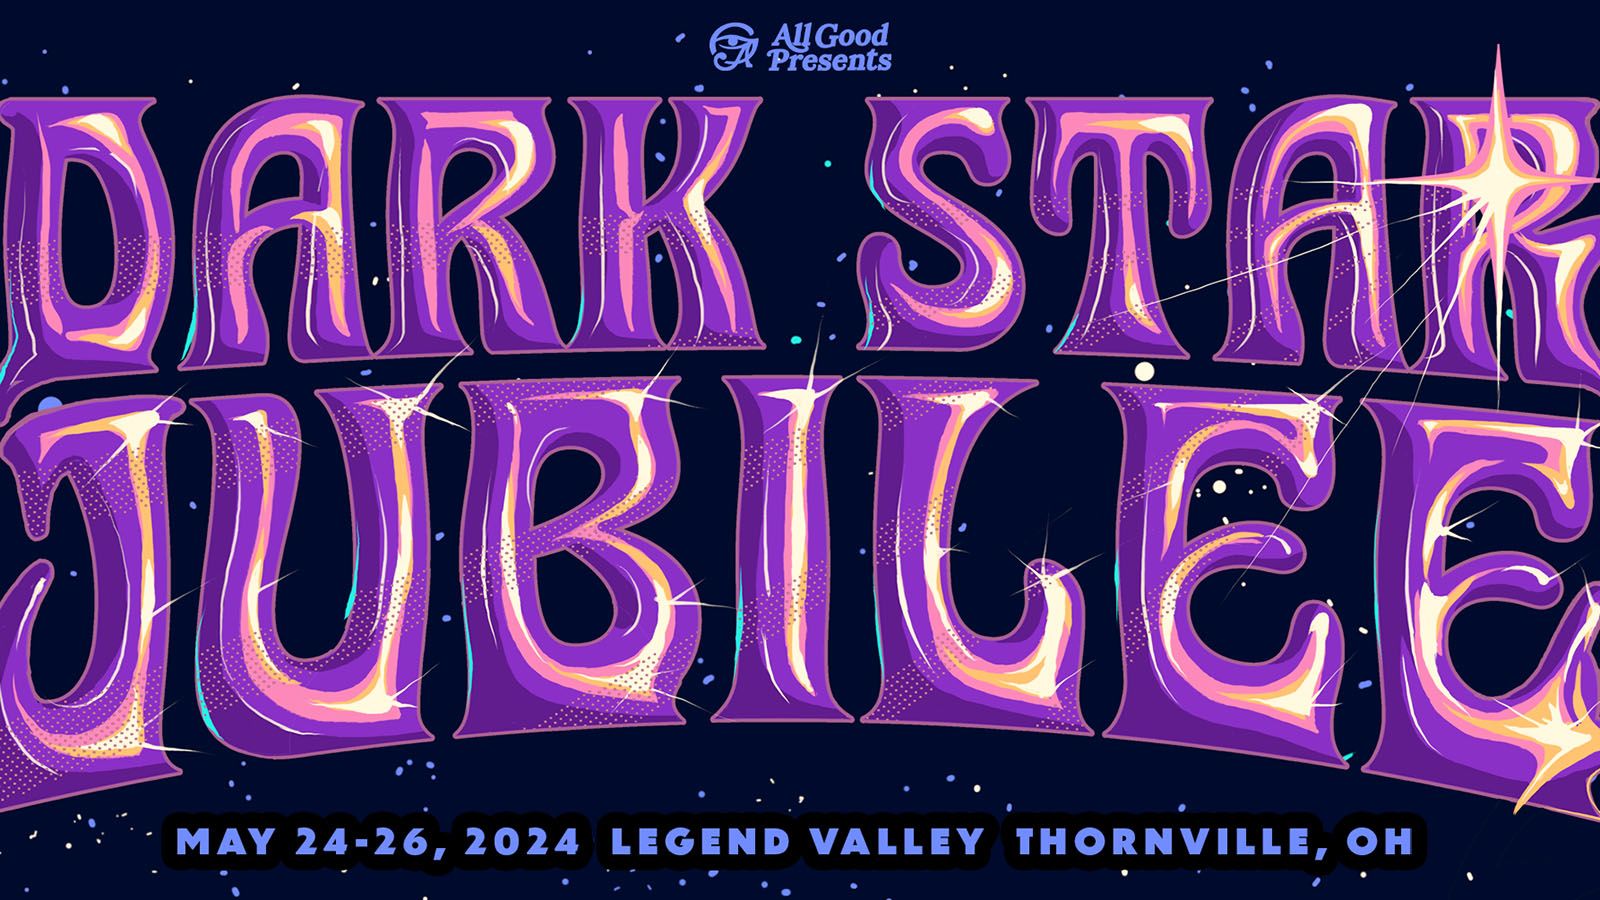 Dark Star Orchestra have finalized the lineup for the their annual Dark Star Jubilee festival at Legend Valley in Thornville, Ohio.